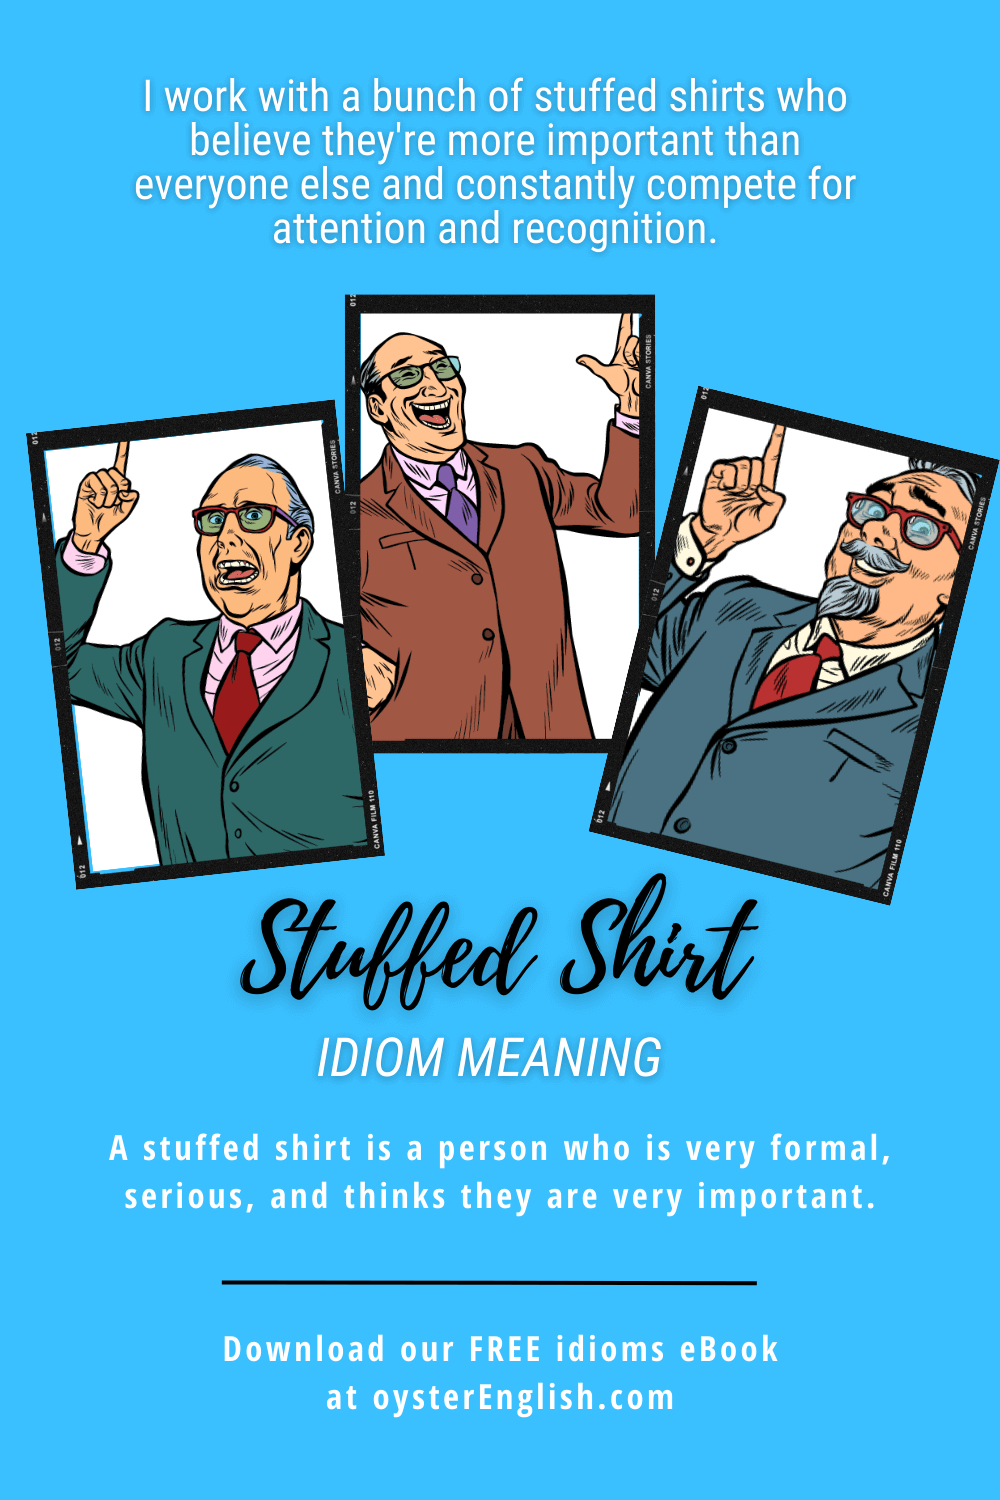 The image shows three elderly gentlemen in formal attire raising their hands as if they are saying something important, portraying the concept of stuffed shirts. "I work with a bunch of stuffed shirts who believe they're more important than everyone else and constantly compete for attention and recognition."